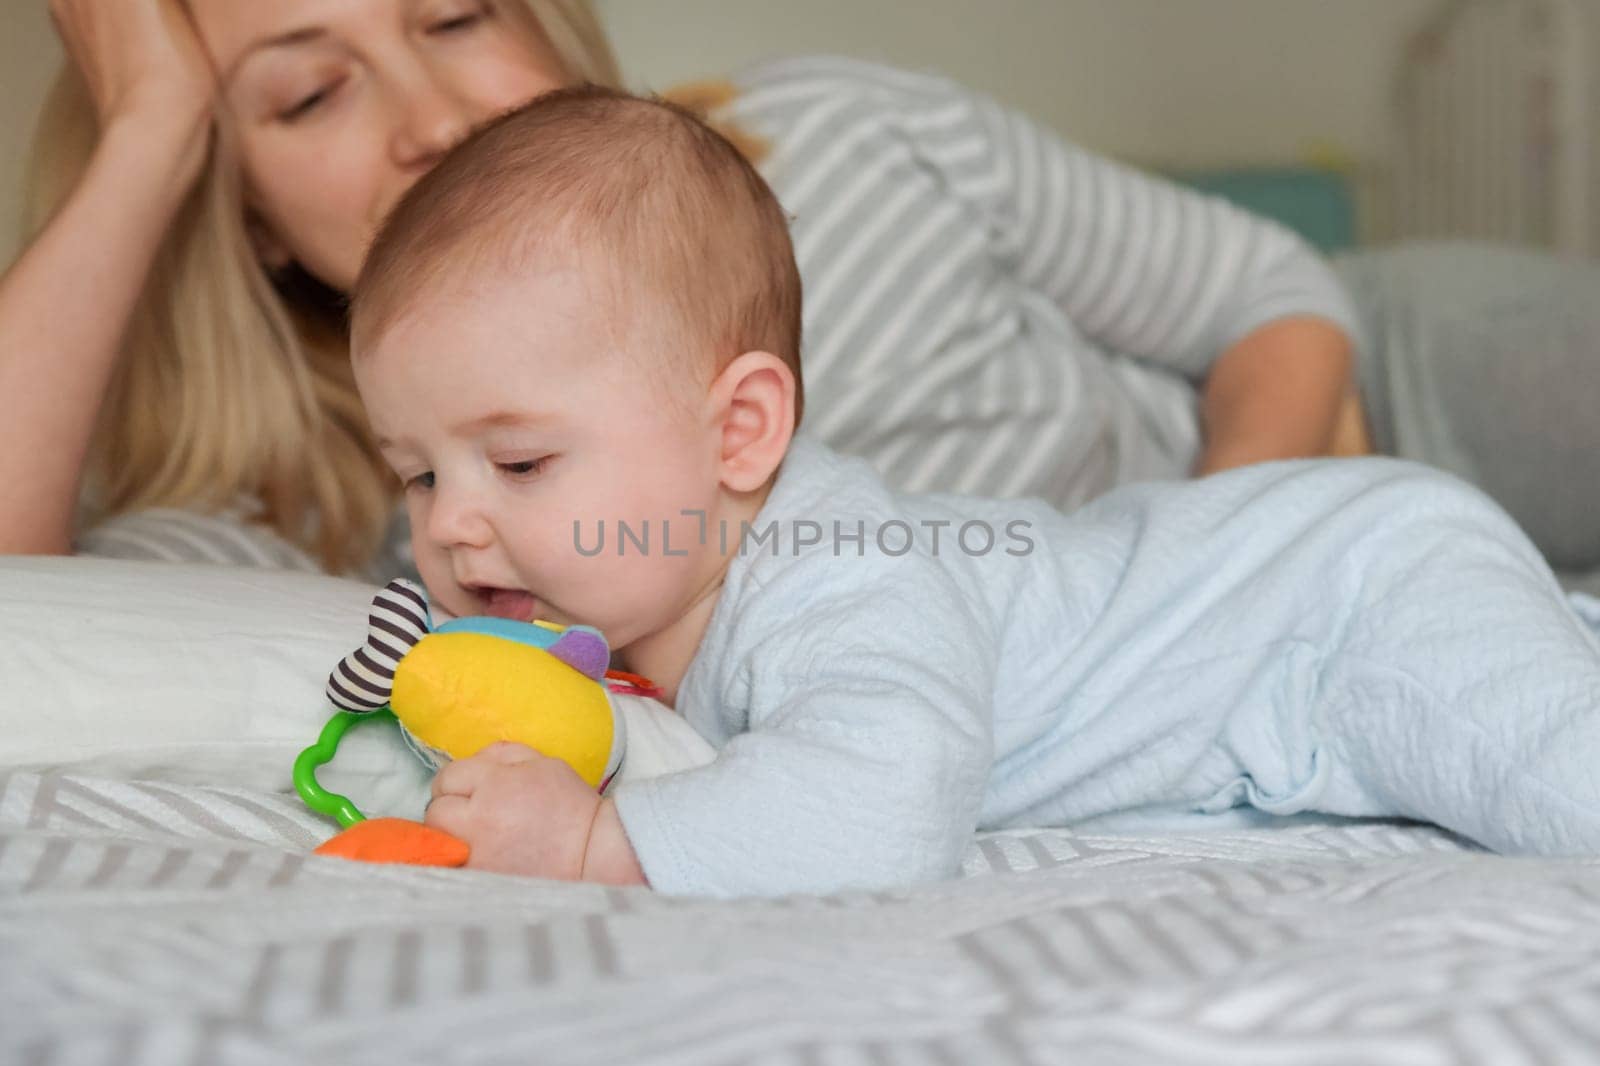 Mother looks at the child as he plays by Godi